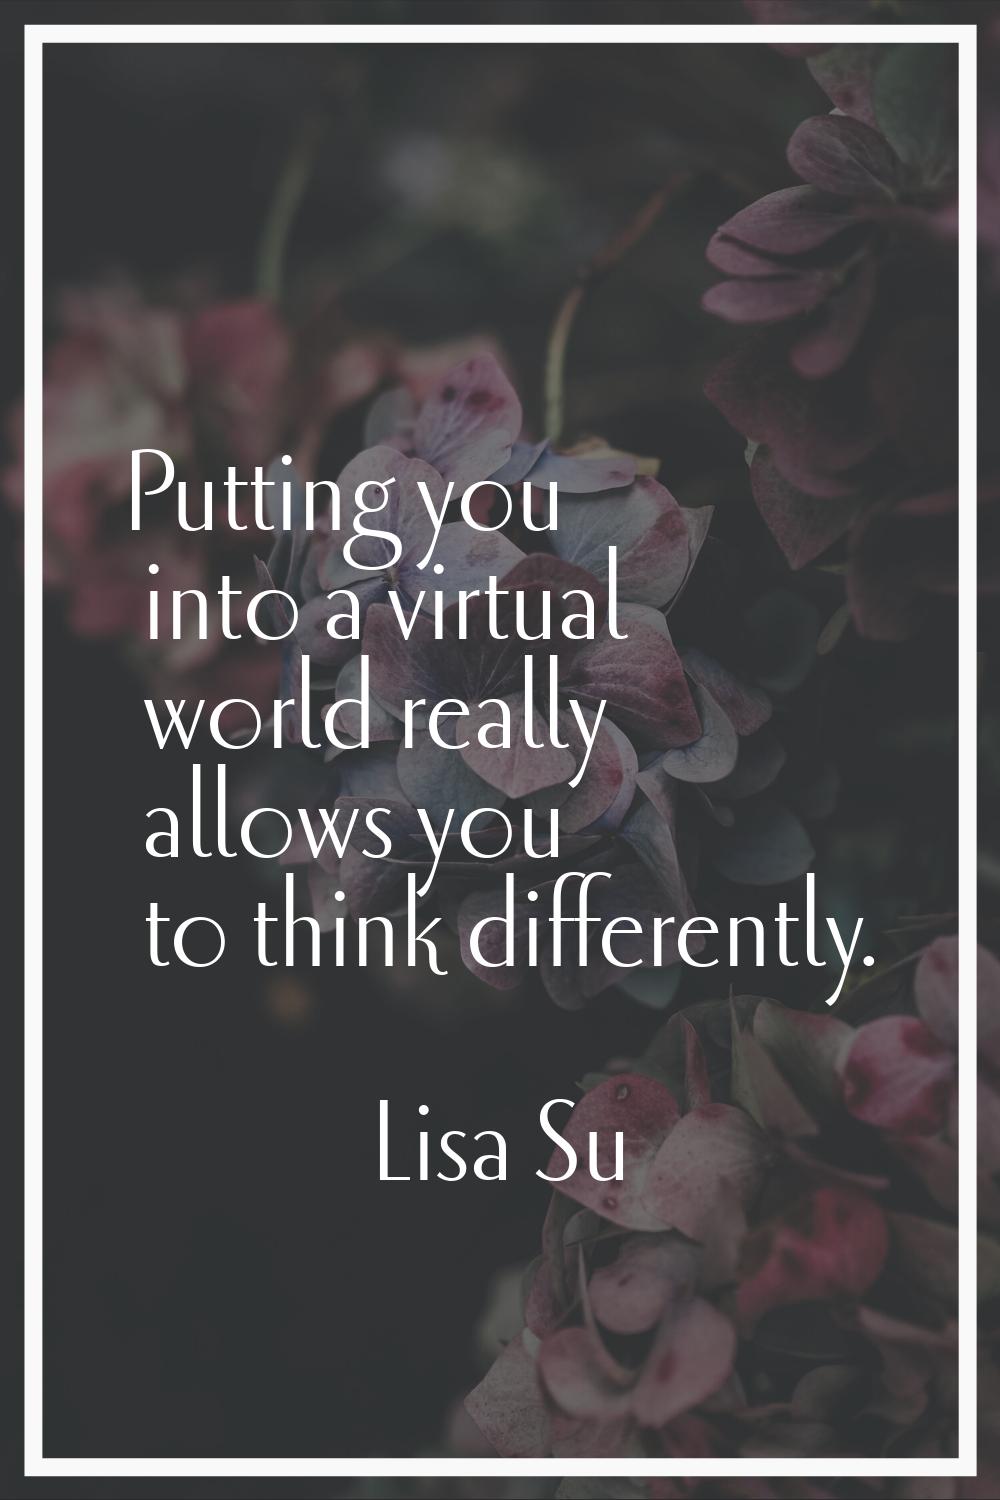 Putting you into a virtual world really allows you to think differently.